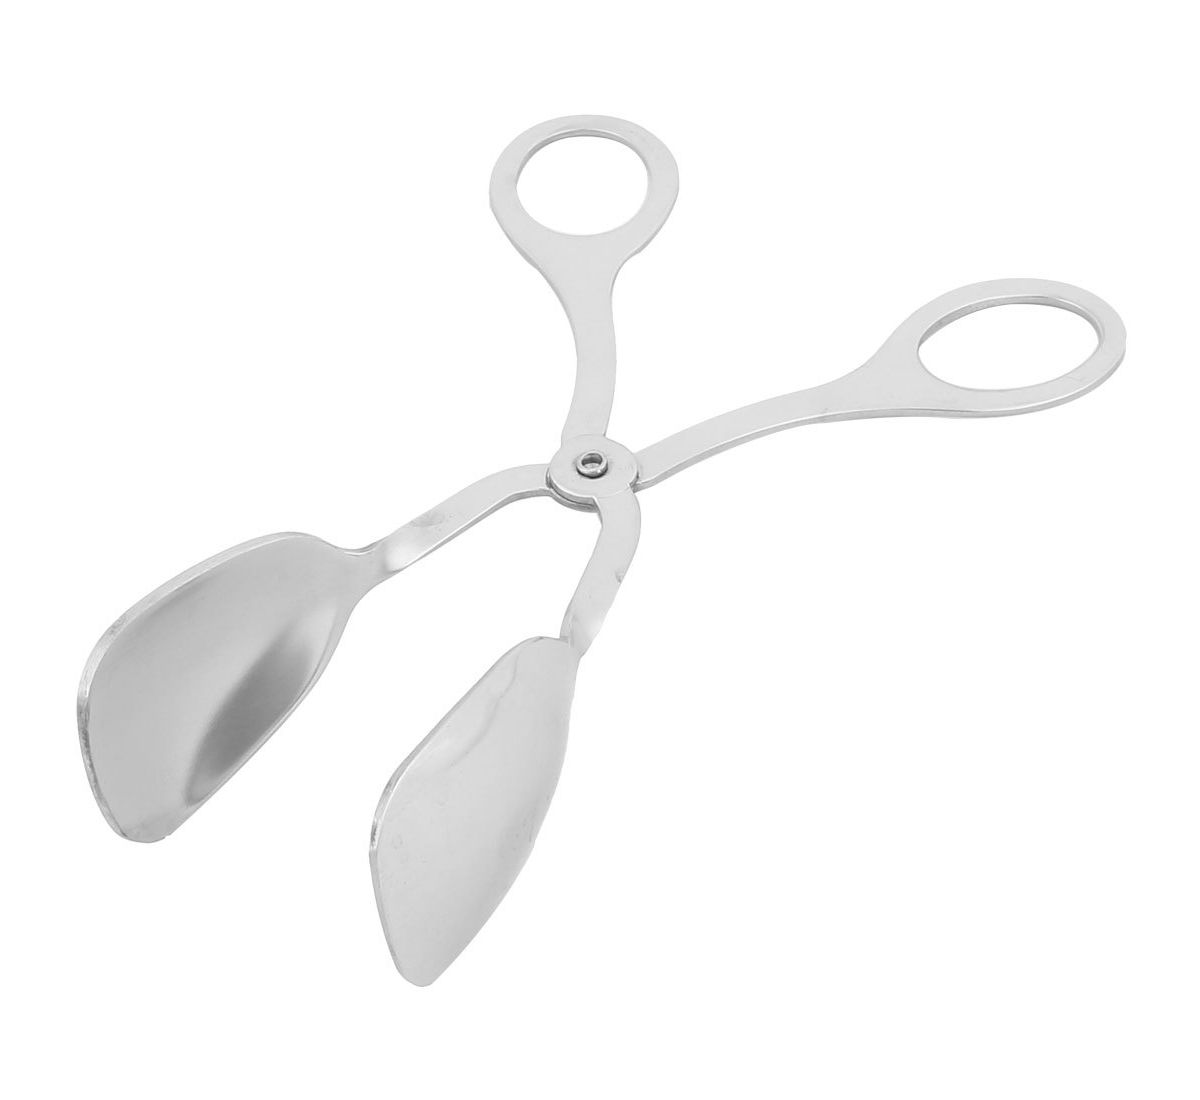 Family Kitchen Restaurant Stainless Steel Salad Server Mixing Tong Unique Bargains